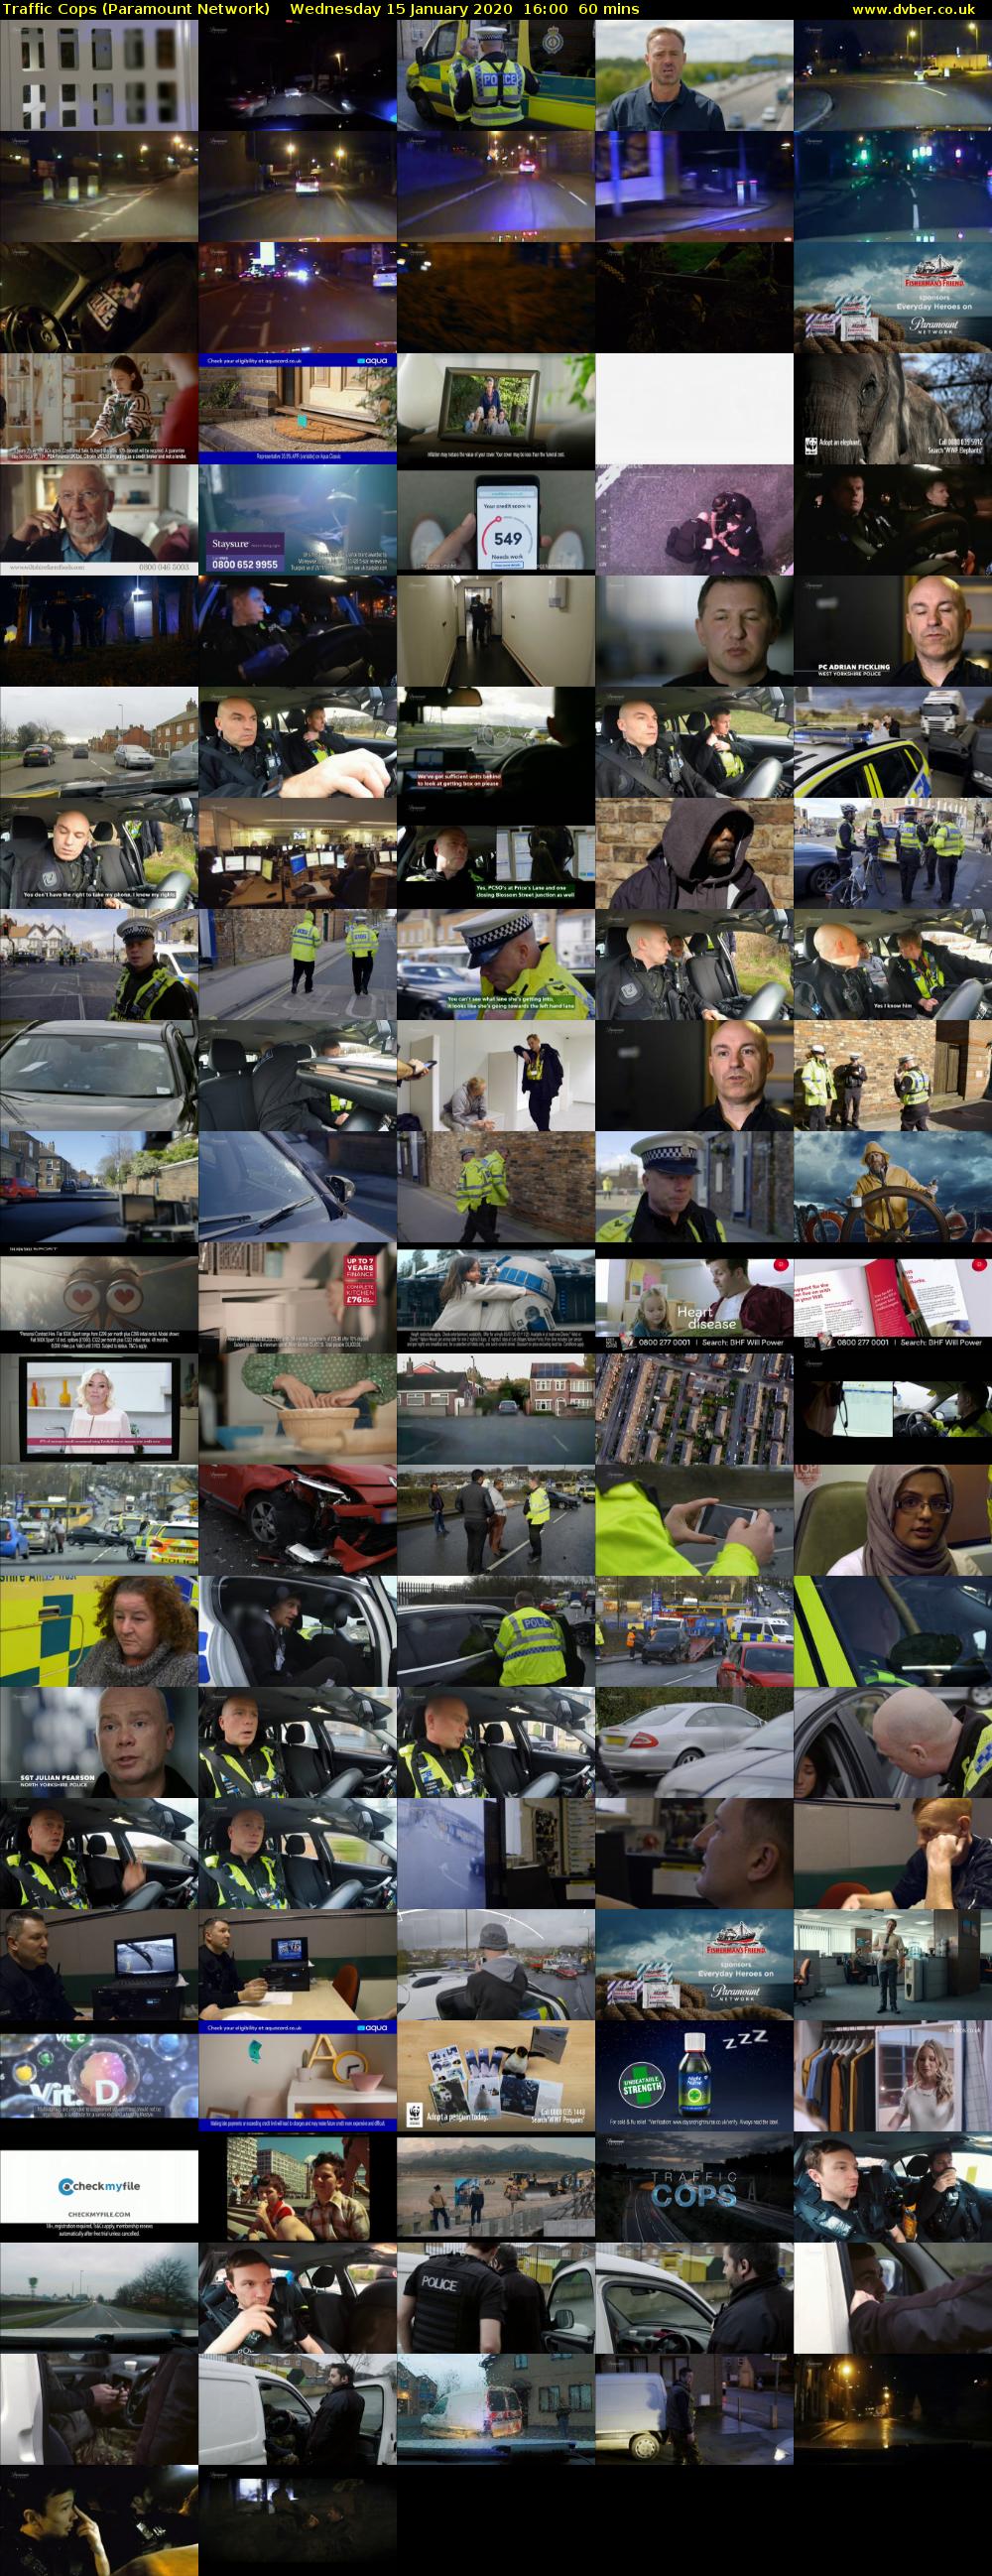 Traffic Cops (Paramount Network) Wednesday 15 January 2020 16:00 - 17:00